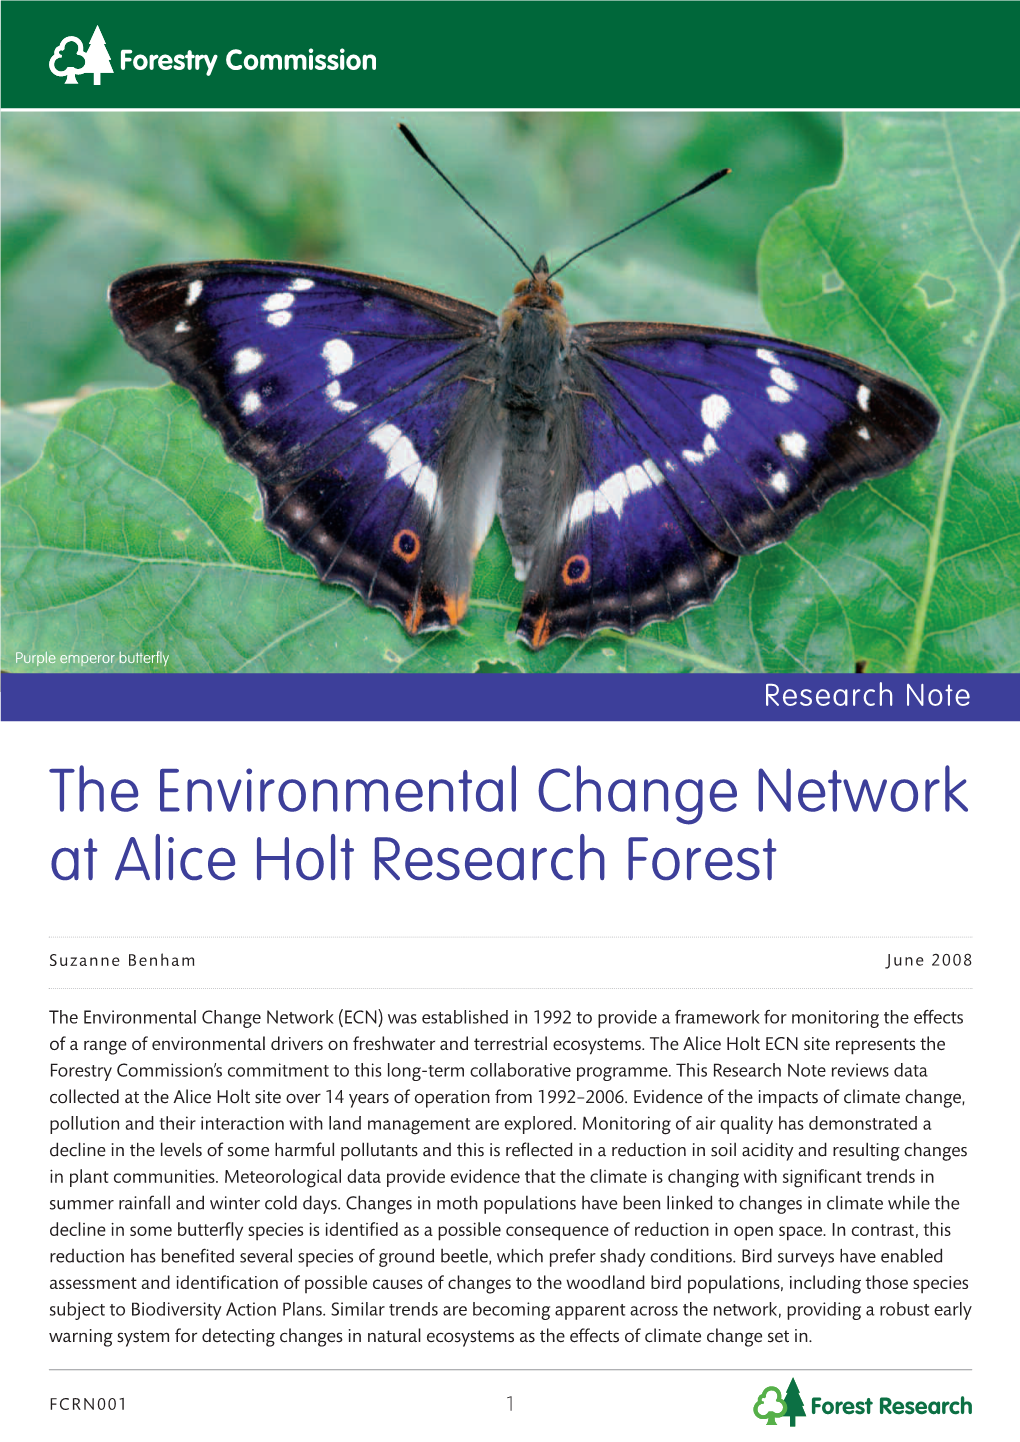 The Environmental Change Network at Alice Holt Research Forest